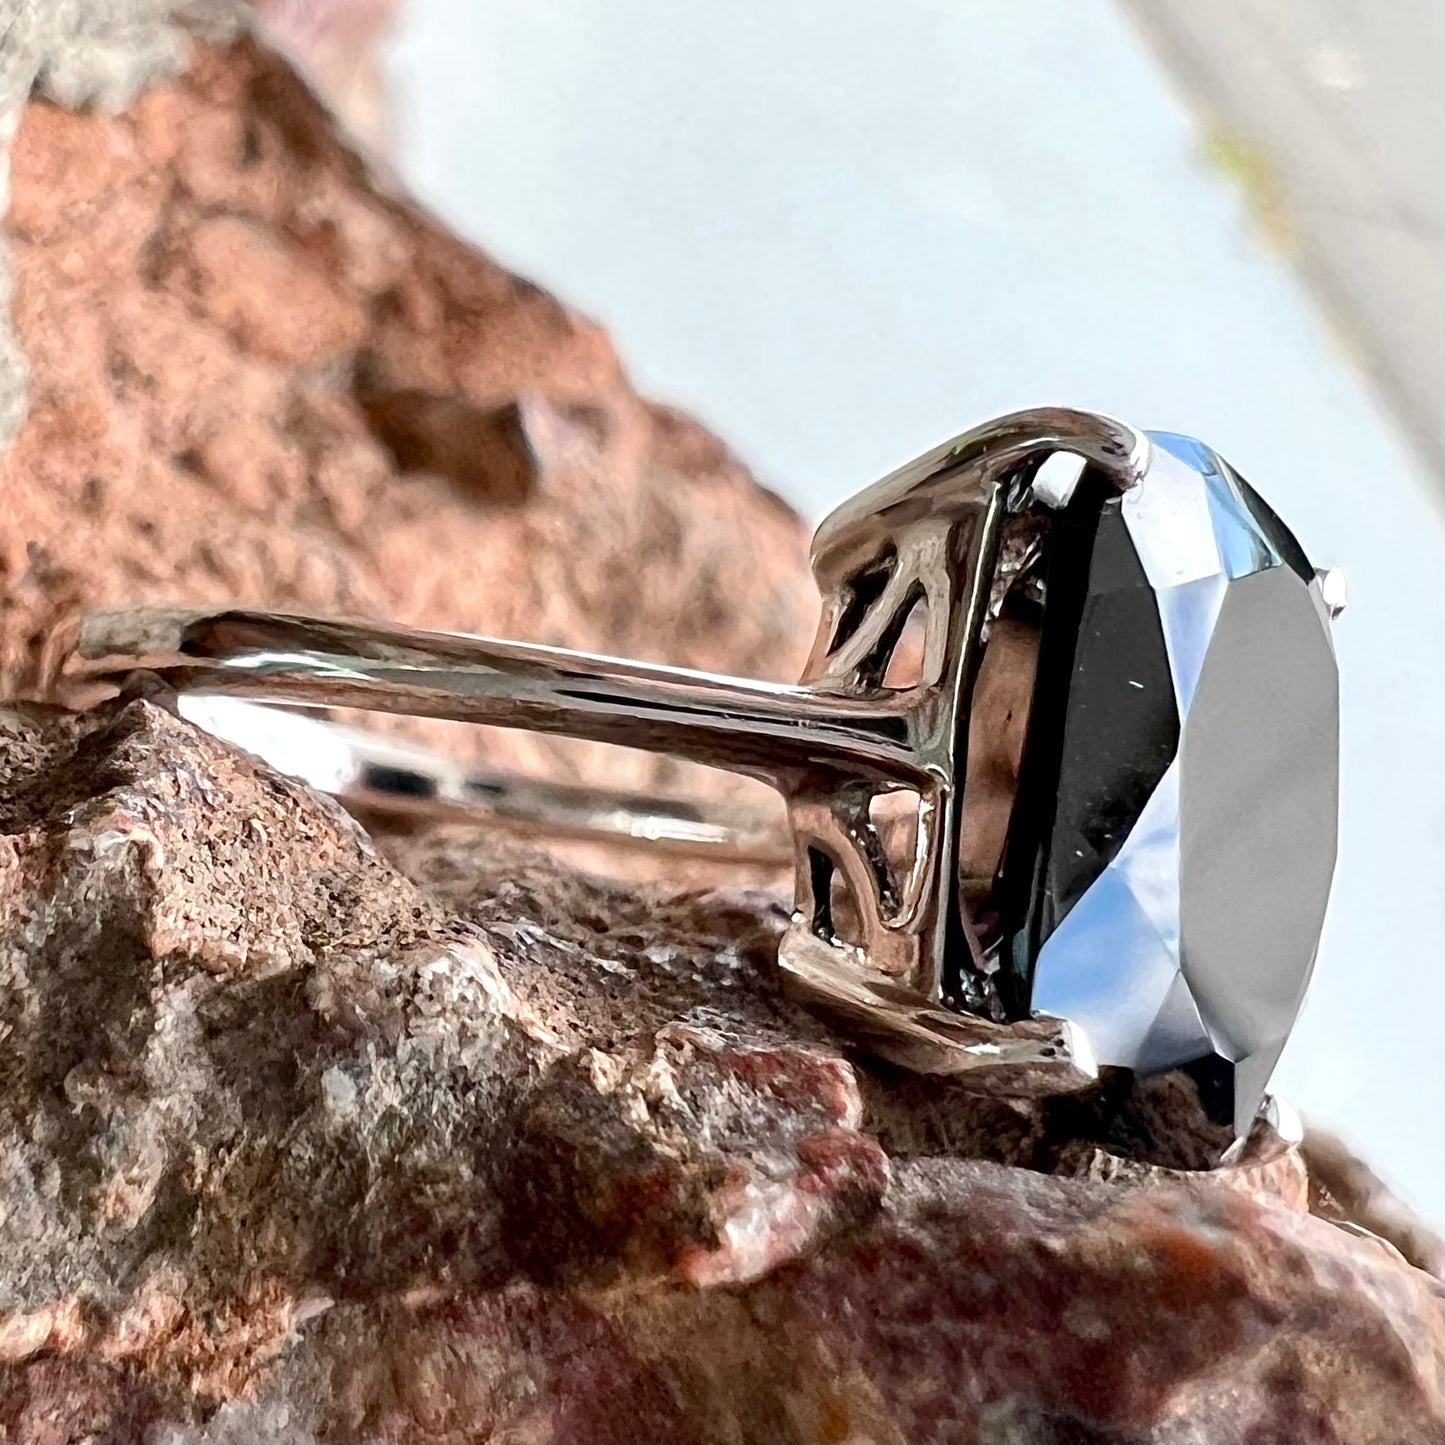 A cushion cut black spinel prong set in a sterling silver solitaire ring.